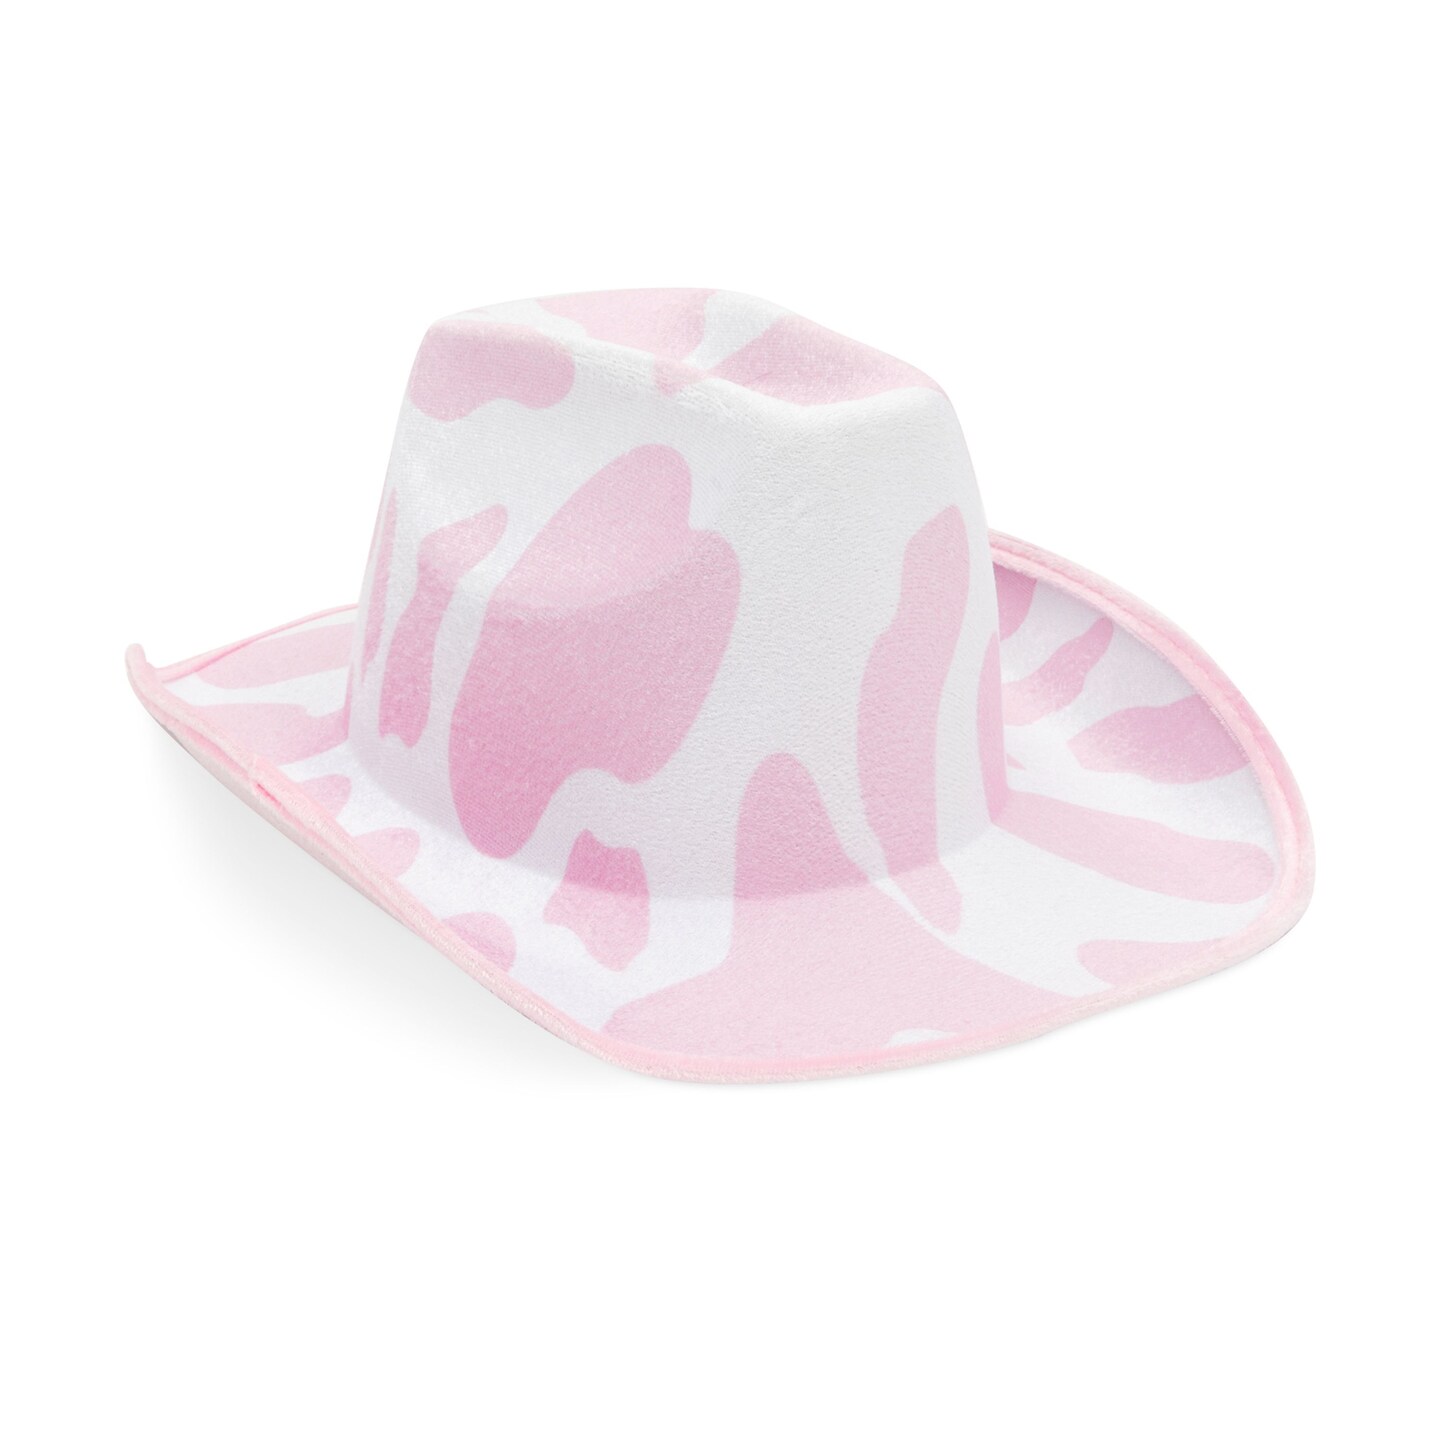 Cowboy Hat for Women, Men - Light Pink Cowgirl Hat with Cow Print Design for Birthday Party, Costume (Adult Size)